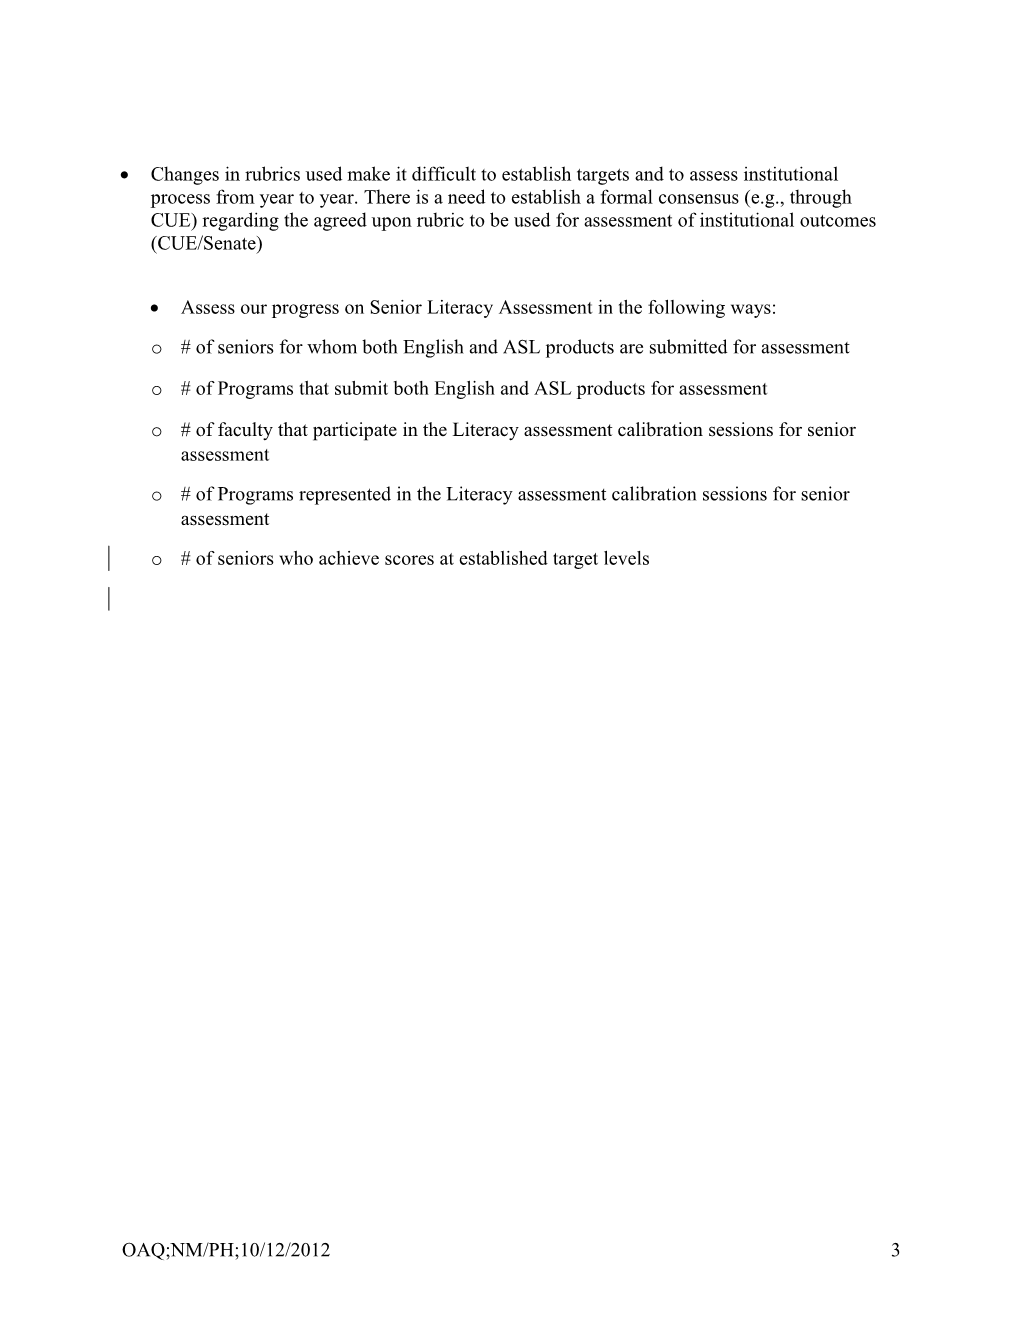 Executive Summary of the 2012 Senior Literacy Assessment